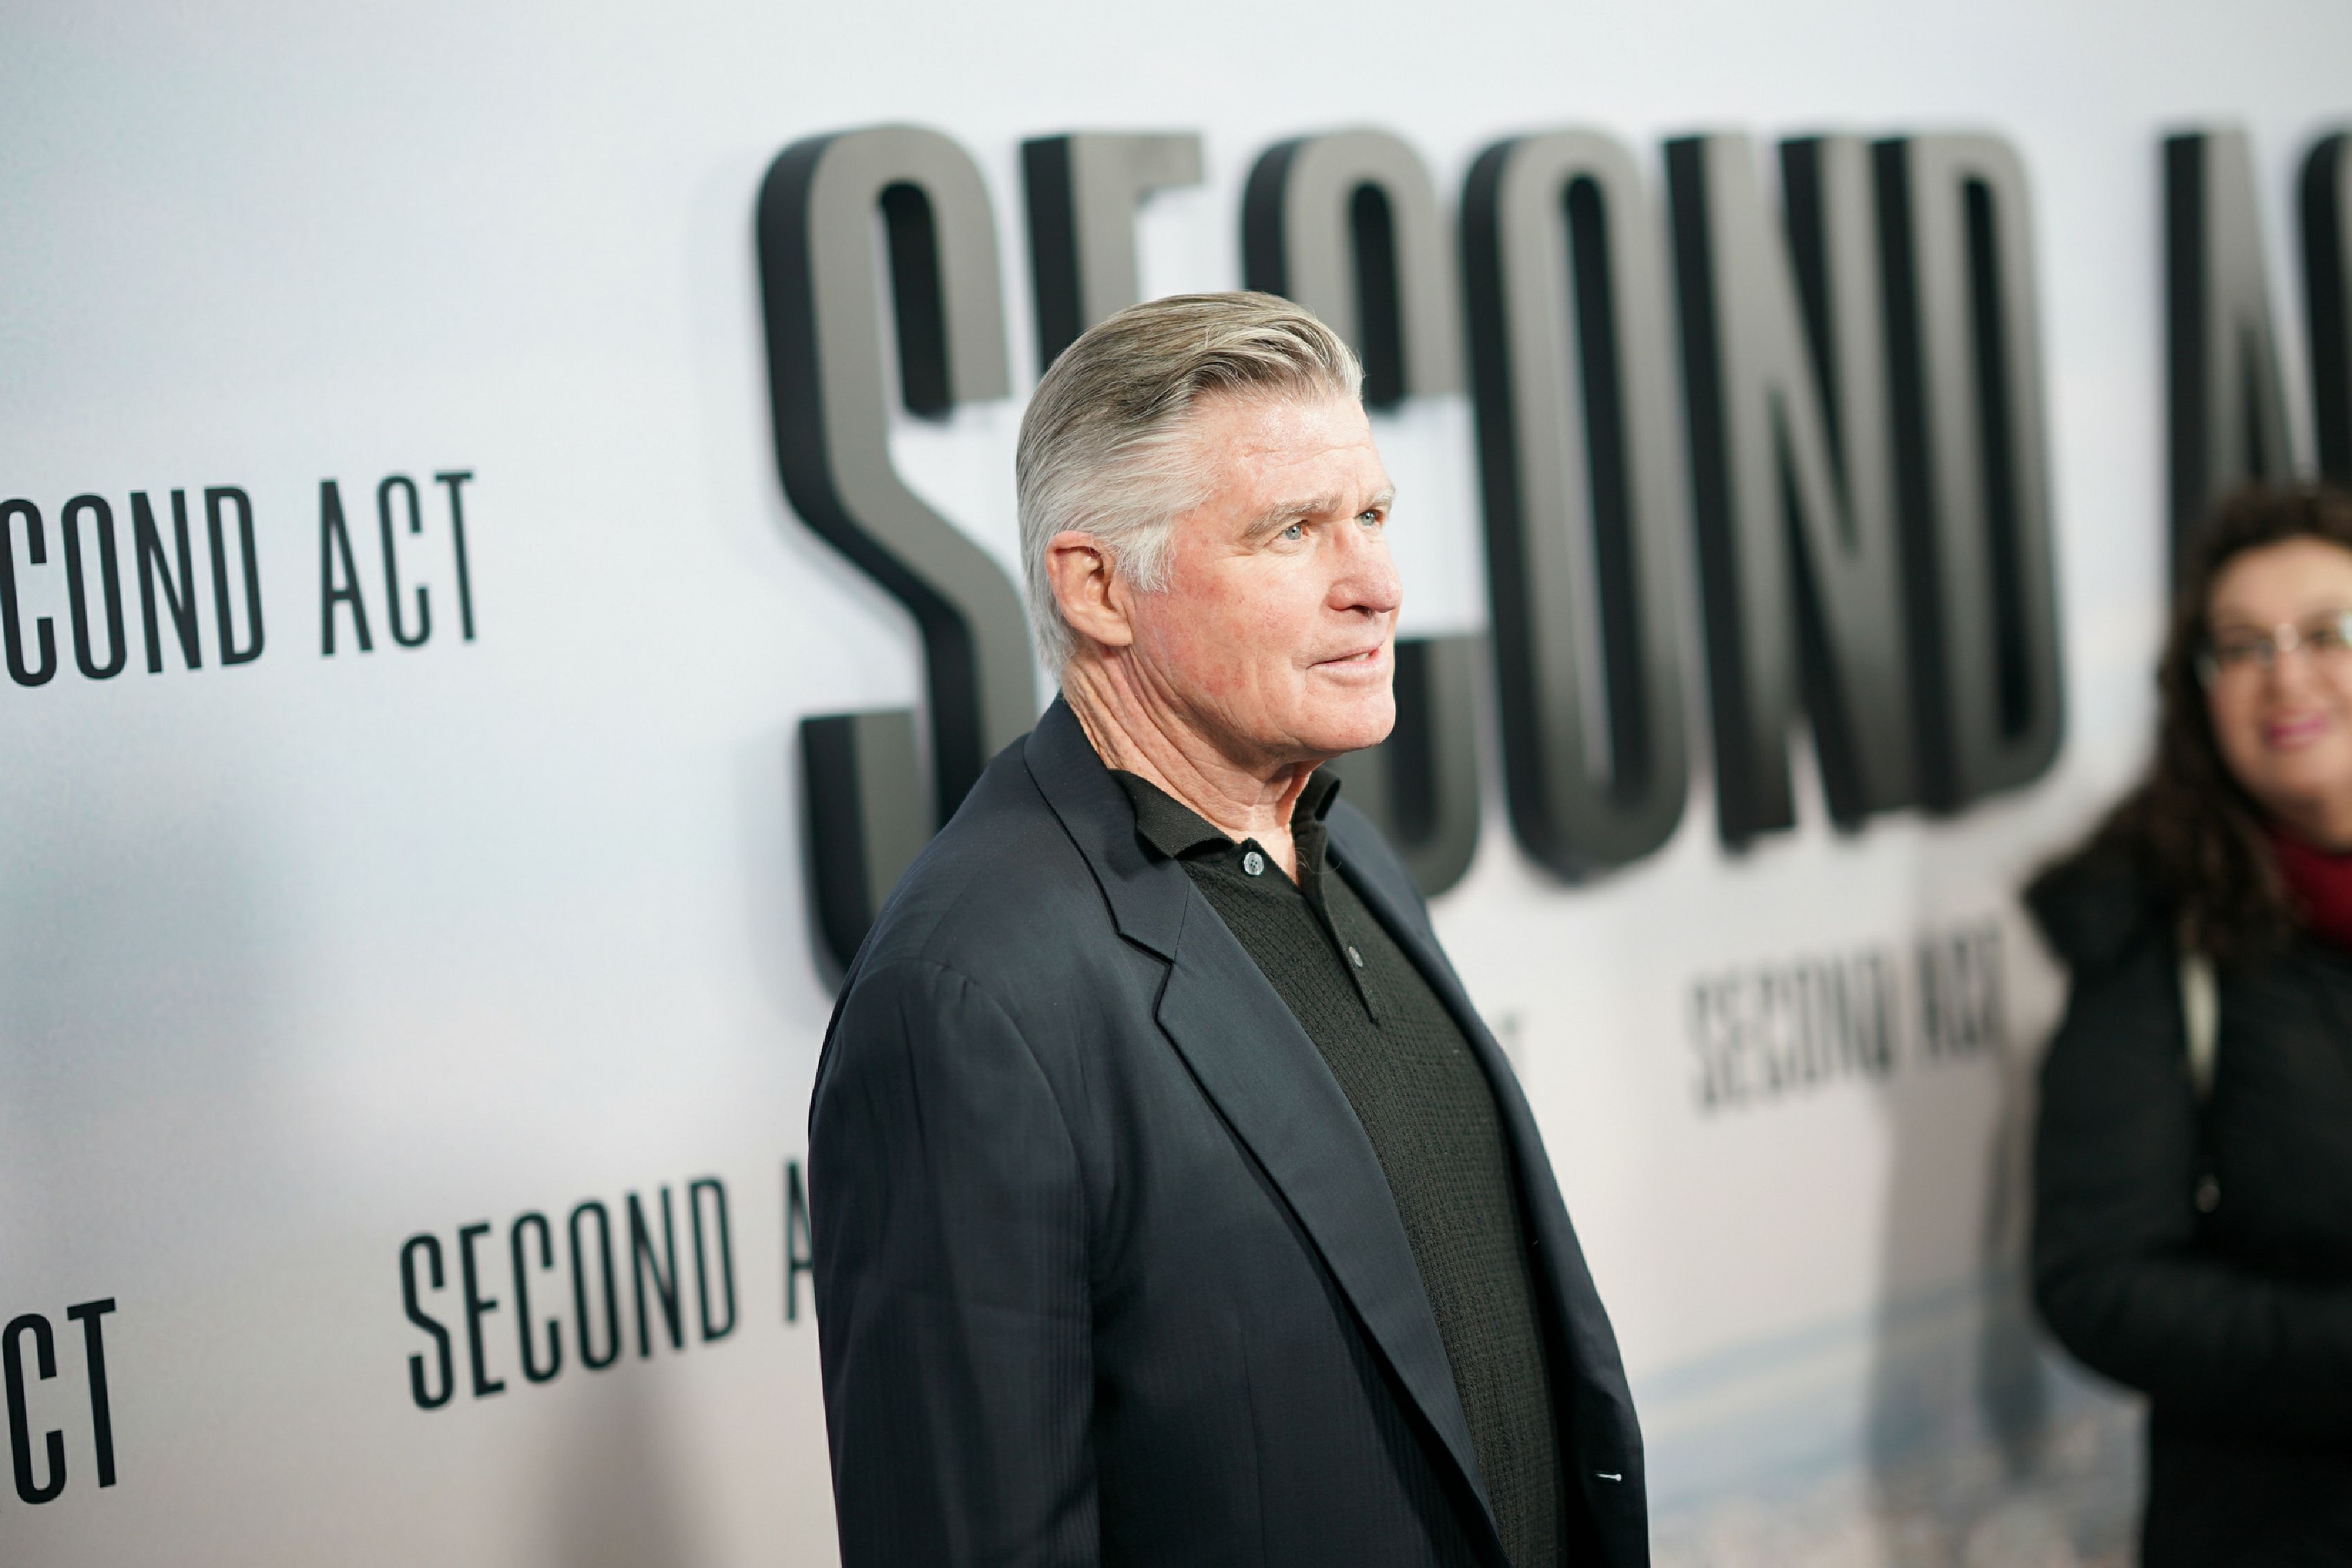 Treat Williams at the Second Act premiere in New York